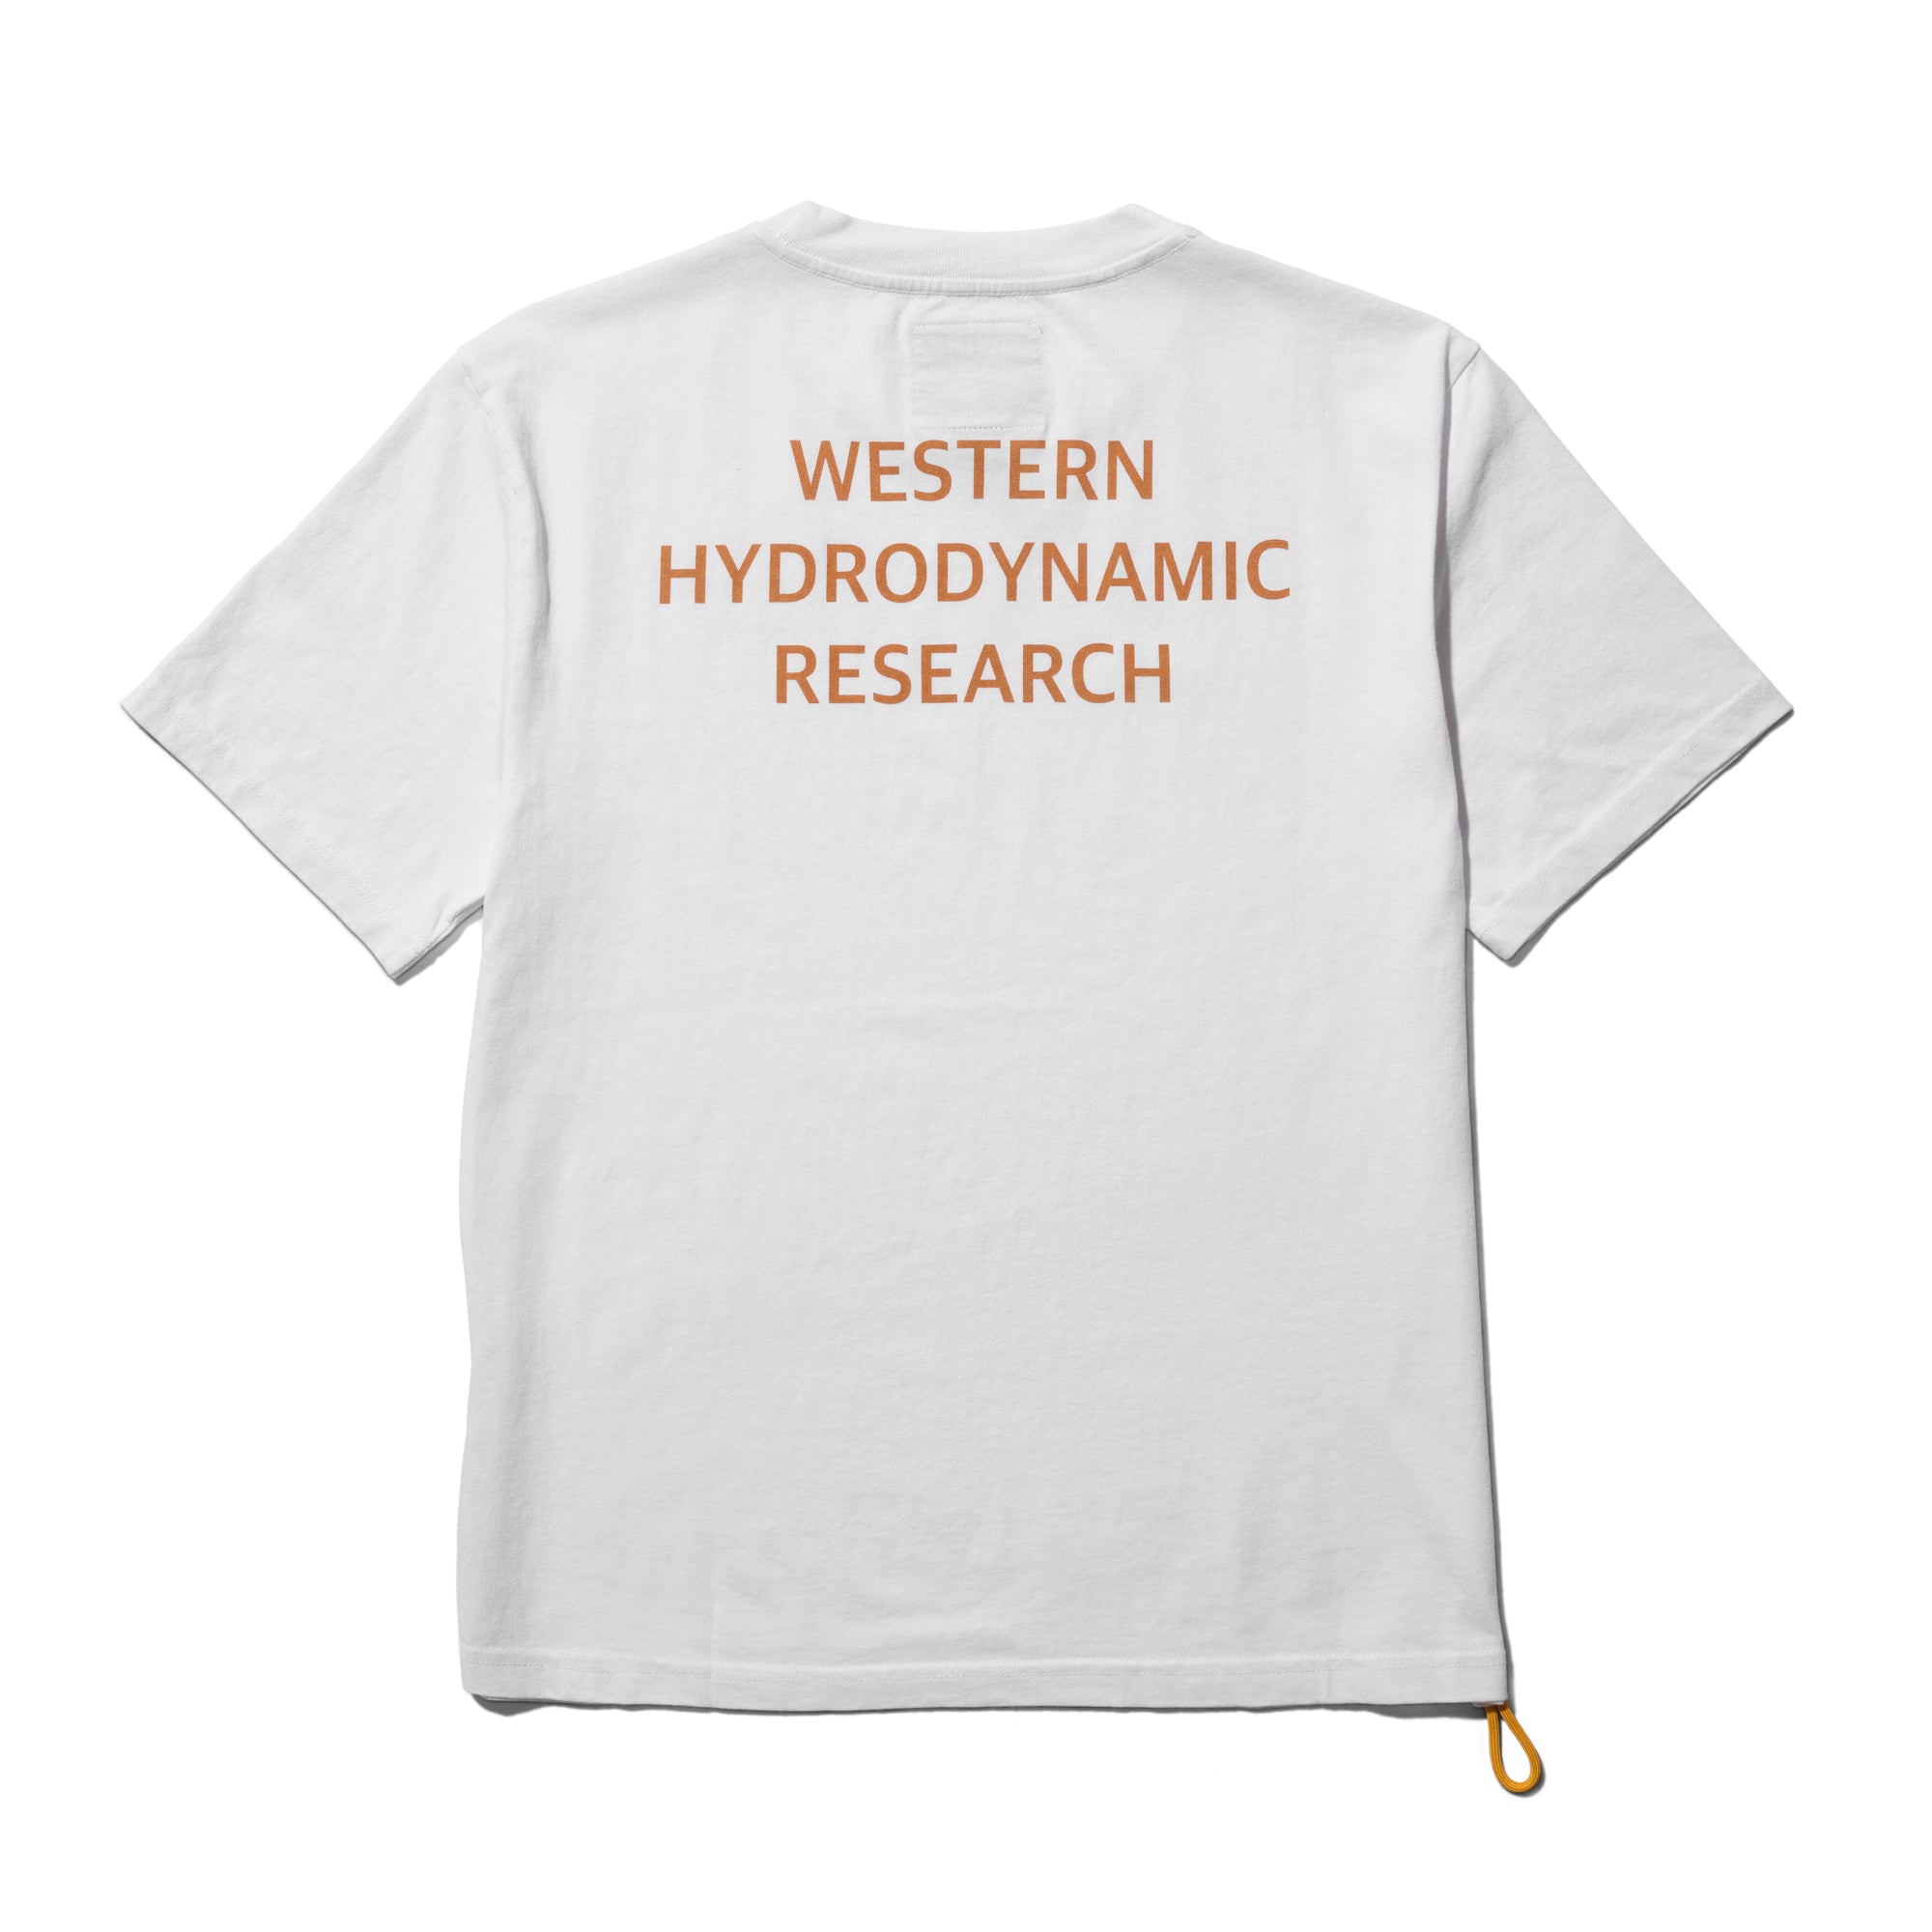 Western Hydrodynamic Research - Men's Worker Tee - (White) view 2